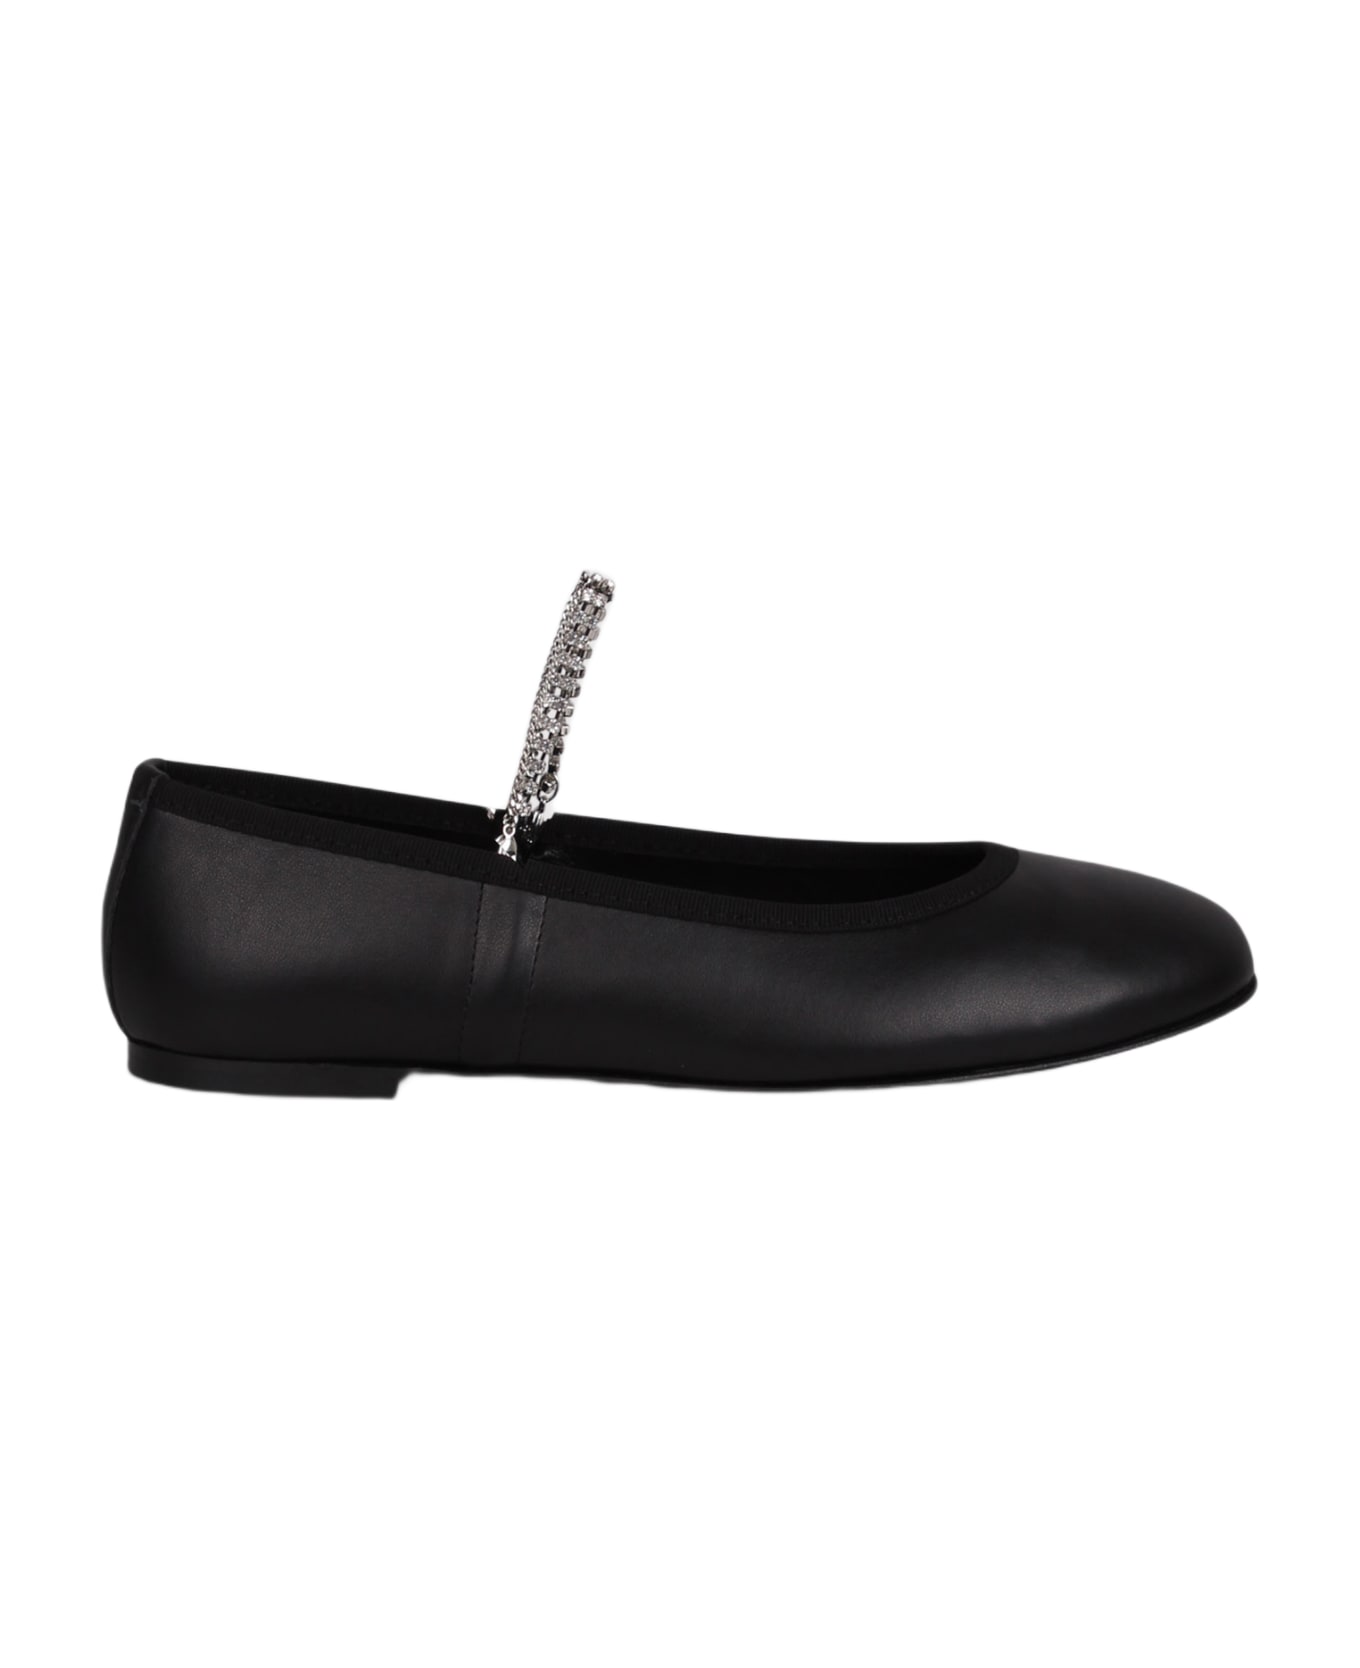 Kate Cate Juliette Leather Ballerina Shoes